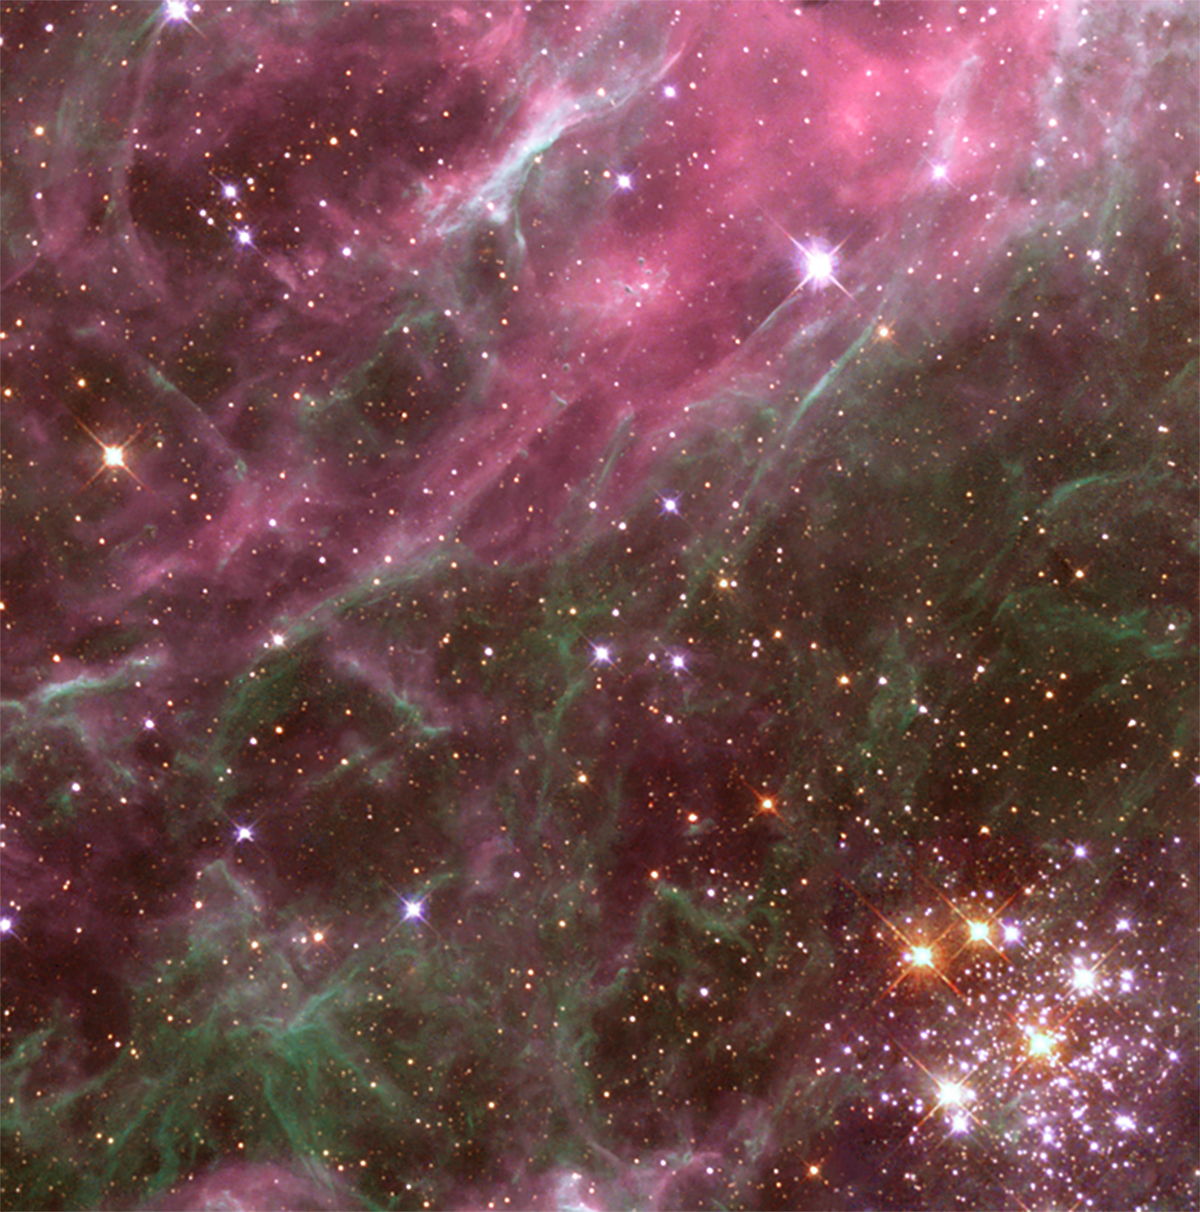 Clouds of dark and light pink, and green fill the scene. Upper-left half of the image is pink, while the lower right half is more green. Lower-right corner holds the star cluster Hodge 301.